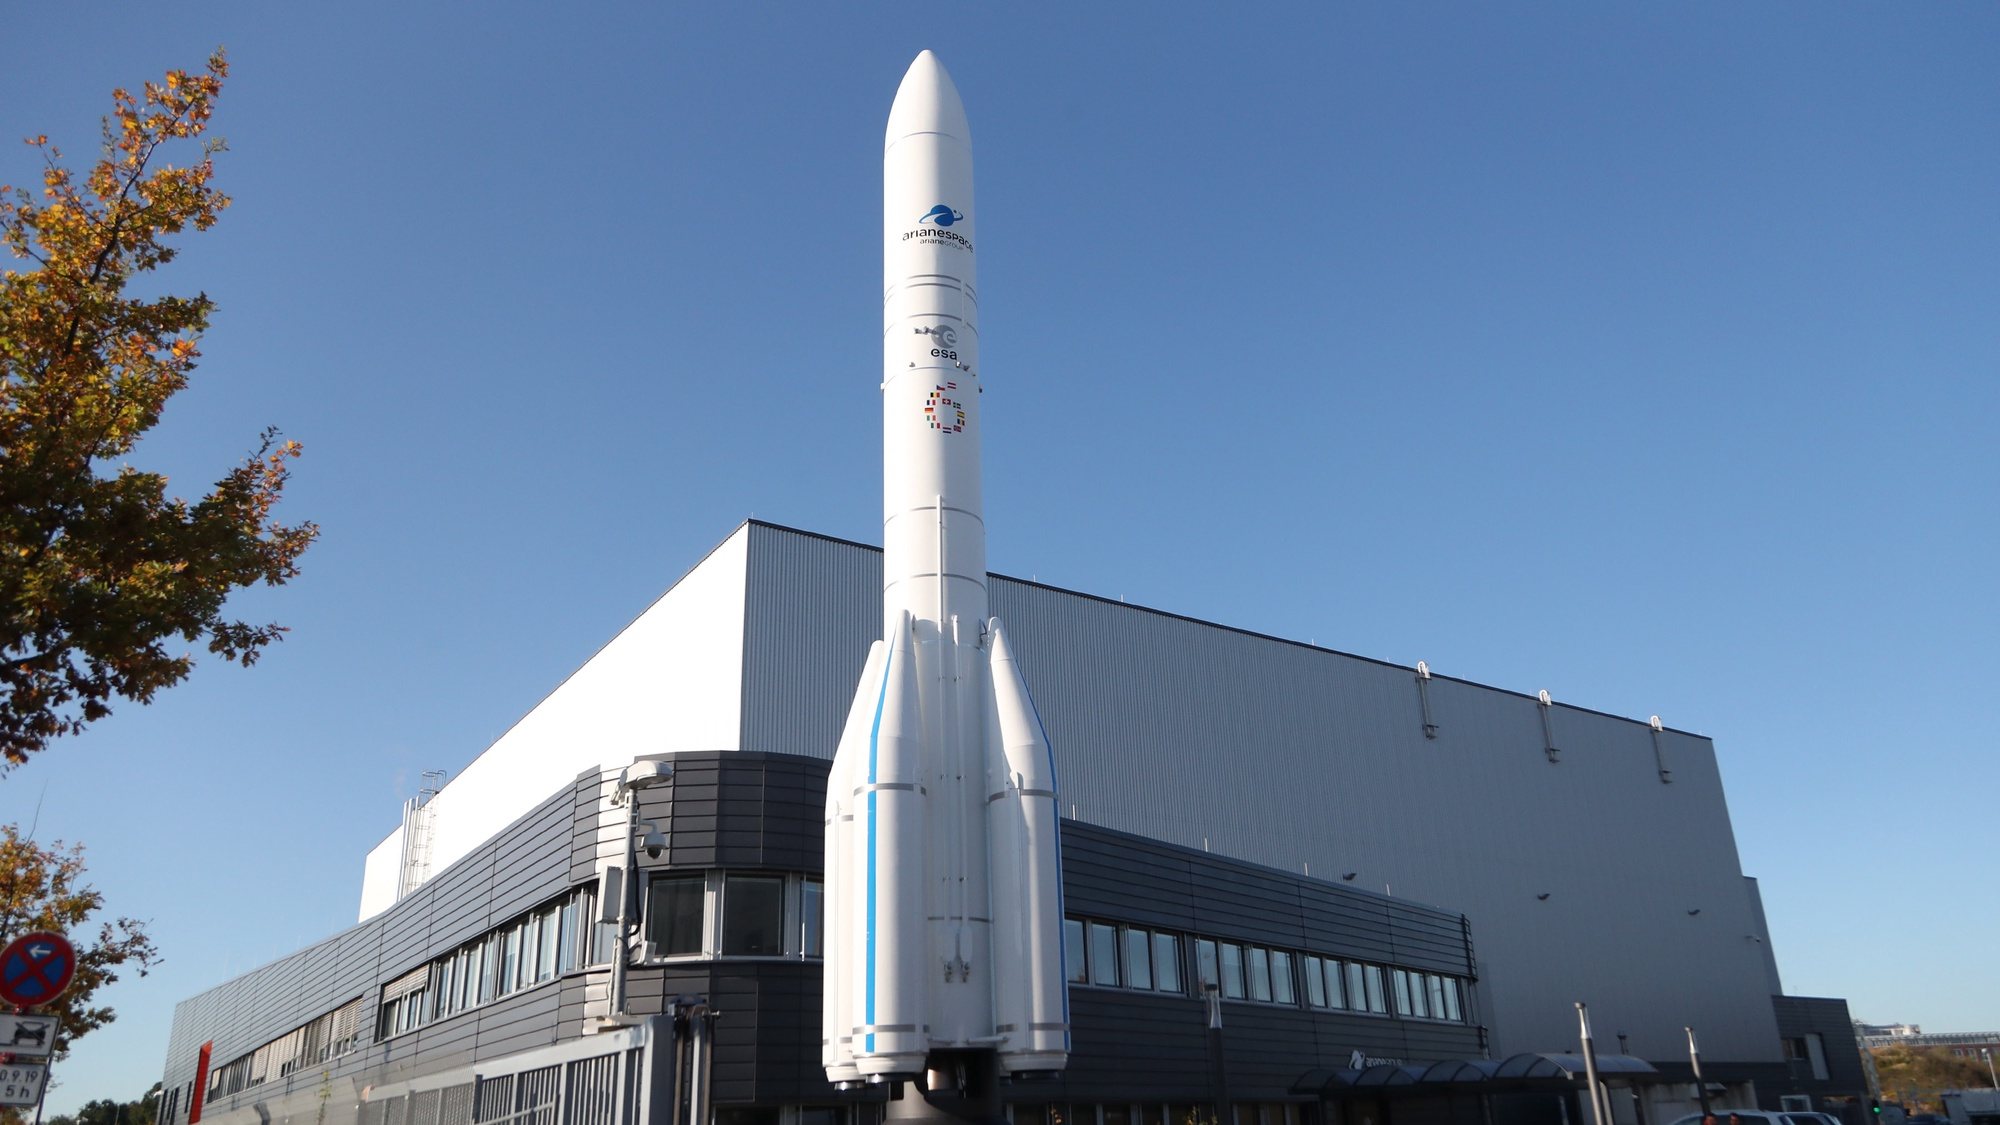 epa07957983 An Ariane 6 scale model in front of the Ariane 6 center of the ArianeGroup in Bremen, northern Germany, 29 October 2019. ArianeGroup builds upper stages and parts of the main stage of the Ariane 6 rocket in its new center in Bremen.  EPA/FOCKE STRANGMANN